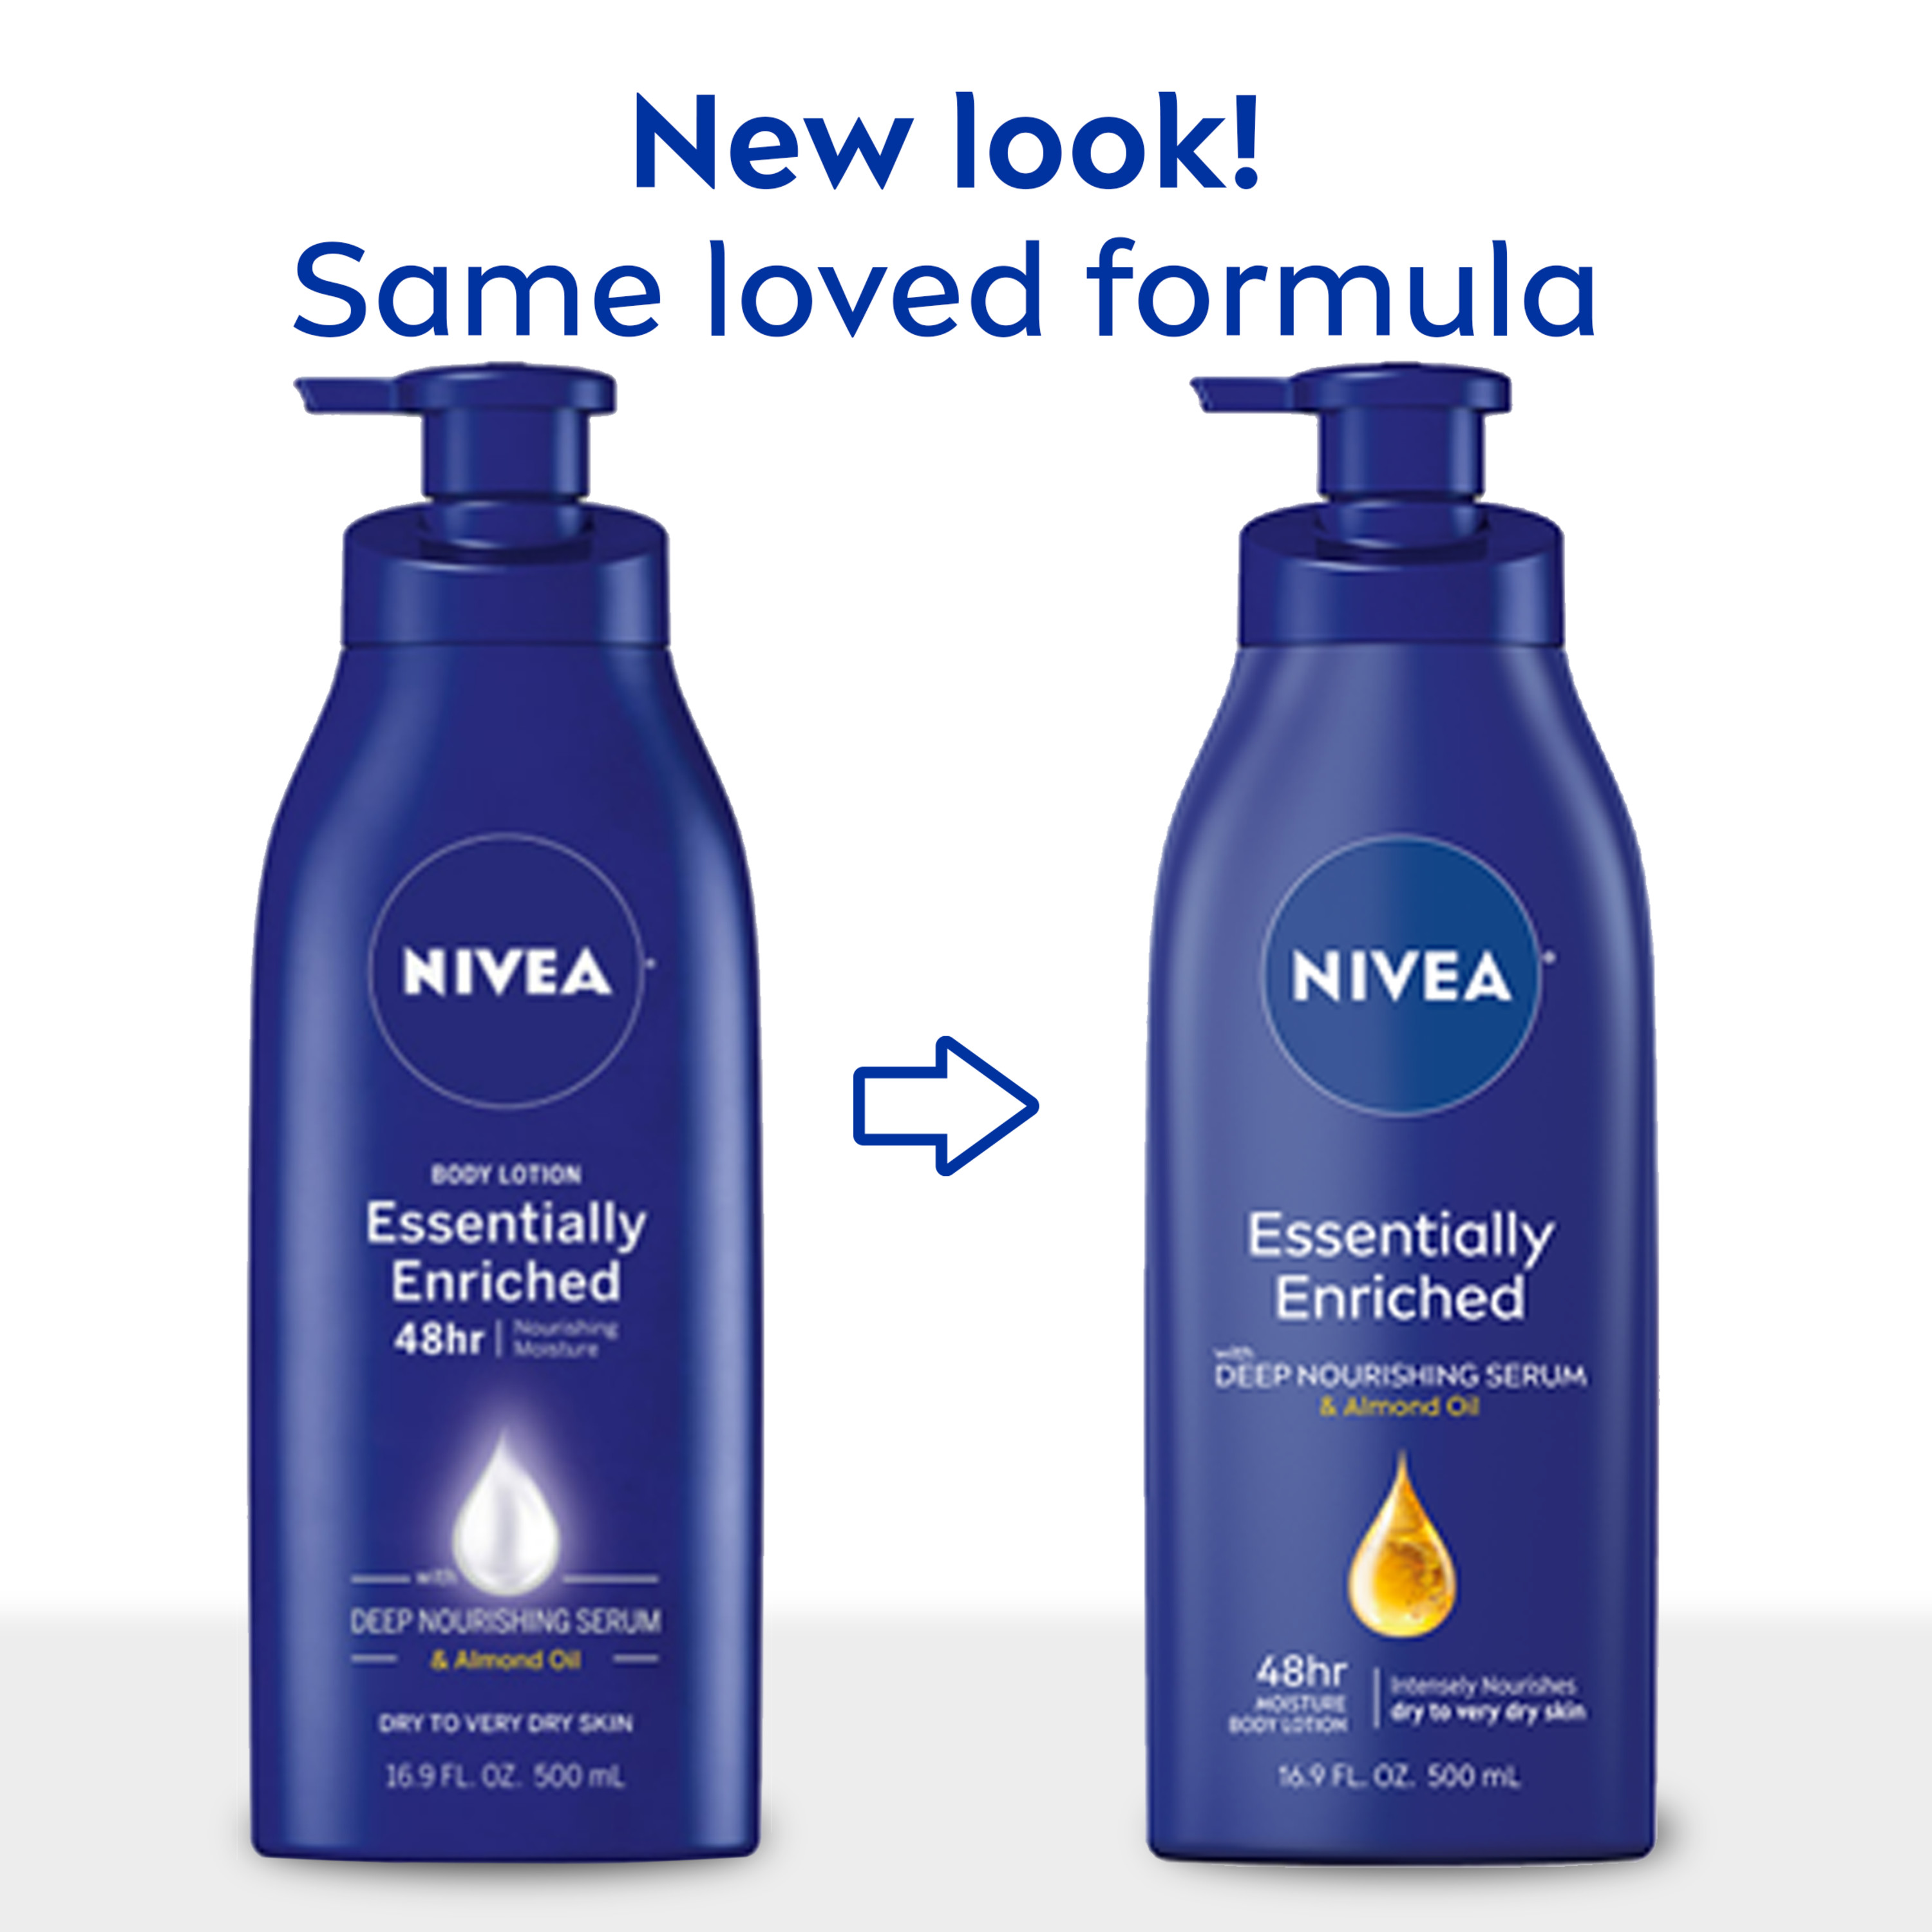 NIVEA Essentially Enriched Body Lotion for Dry Skin, 16.9 Fl Oz Pump Bottle - image 4 of 14